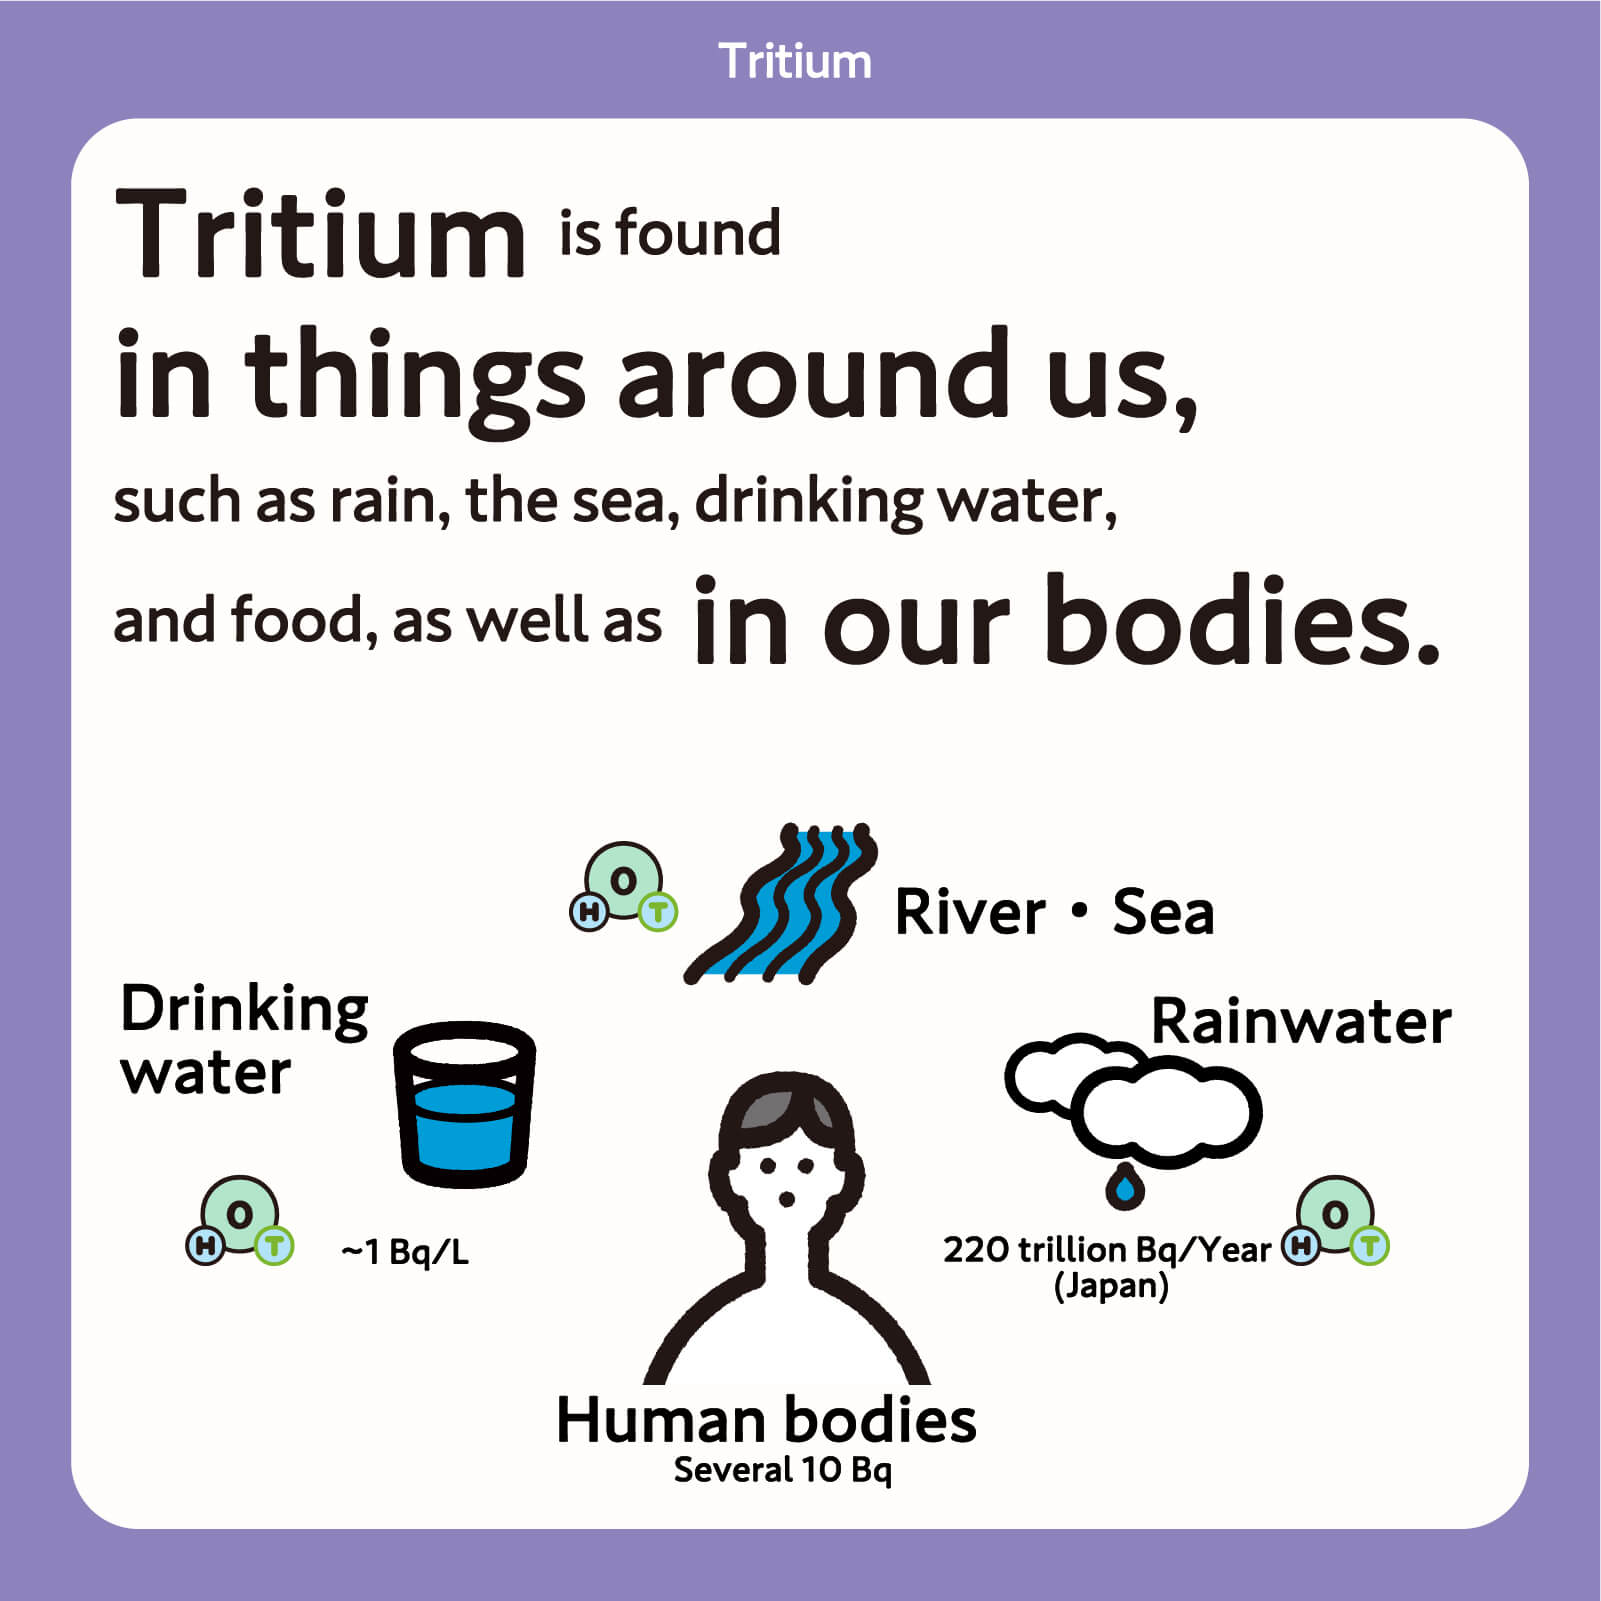 Tritium is found in things around us, such as rain, the sea, drinking water, and food, as well as in our bodies.